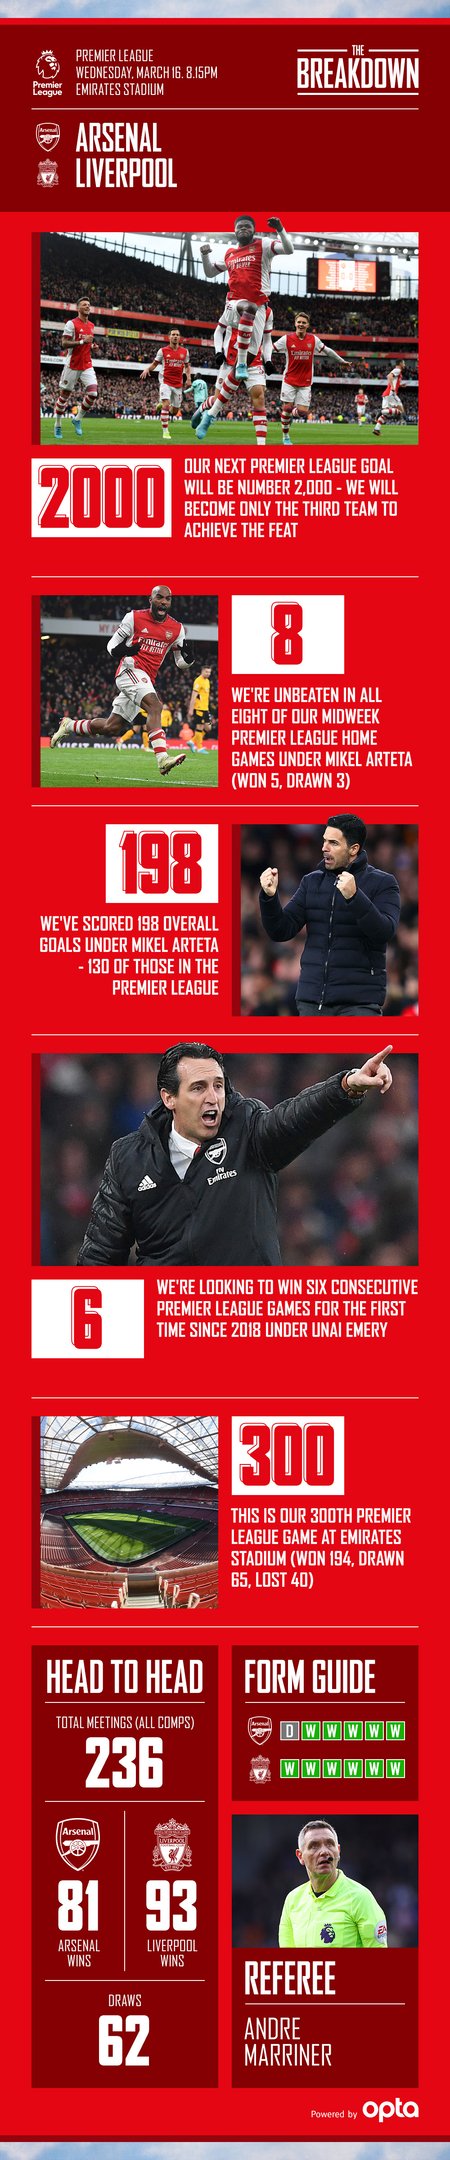 Arsenal v Liverpool: preview, stats, video | Match preview | News | Arsenal. com